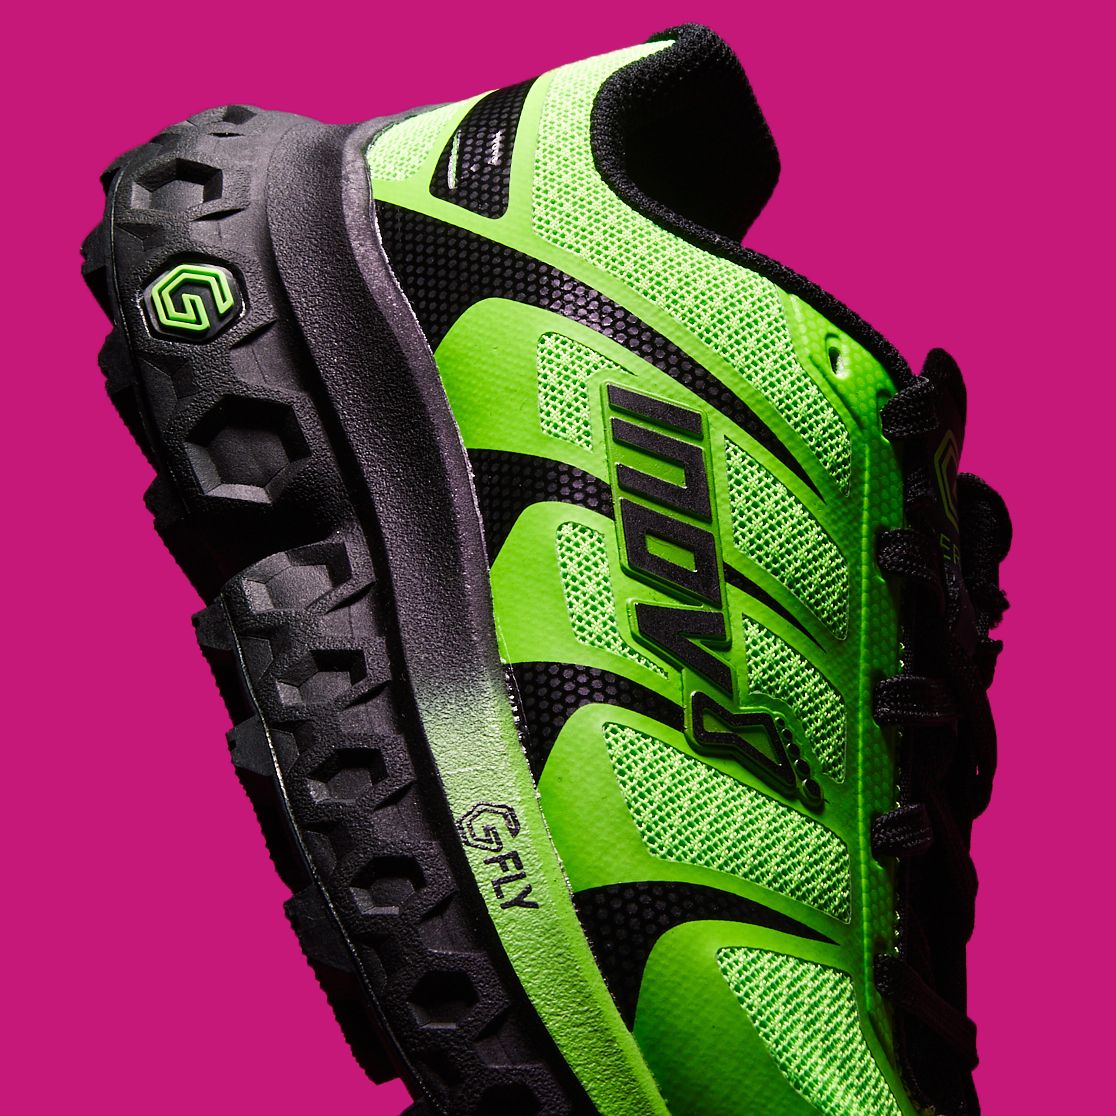 pedal Circulo Claire Inov-8 TrailFly Ultra G 300 Max Review | Trail Running Shoes 2021